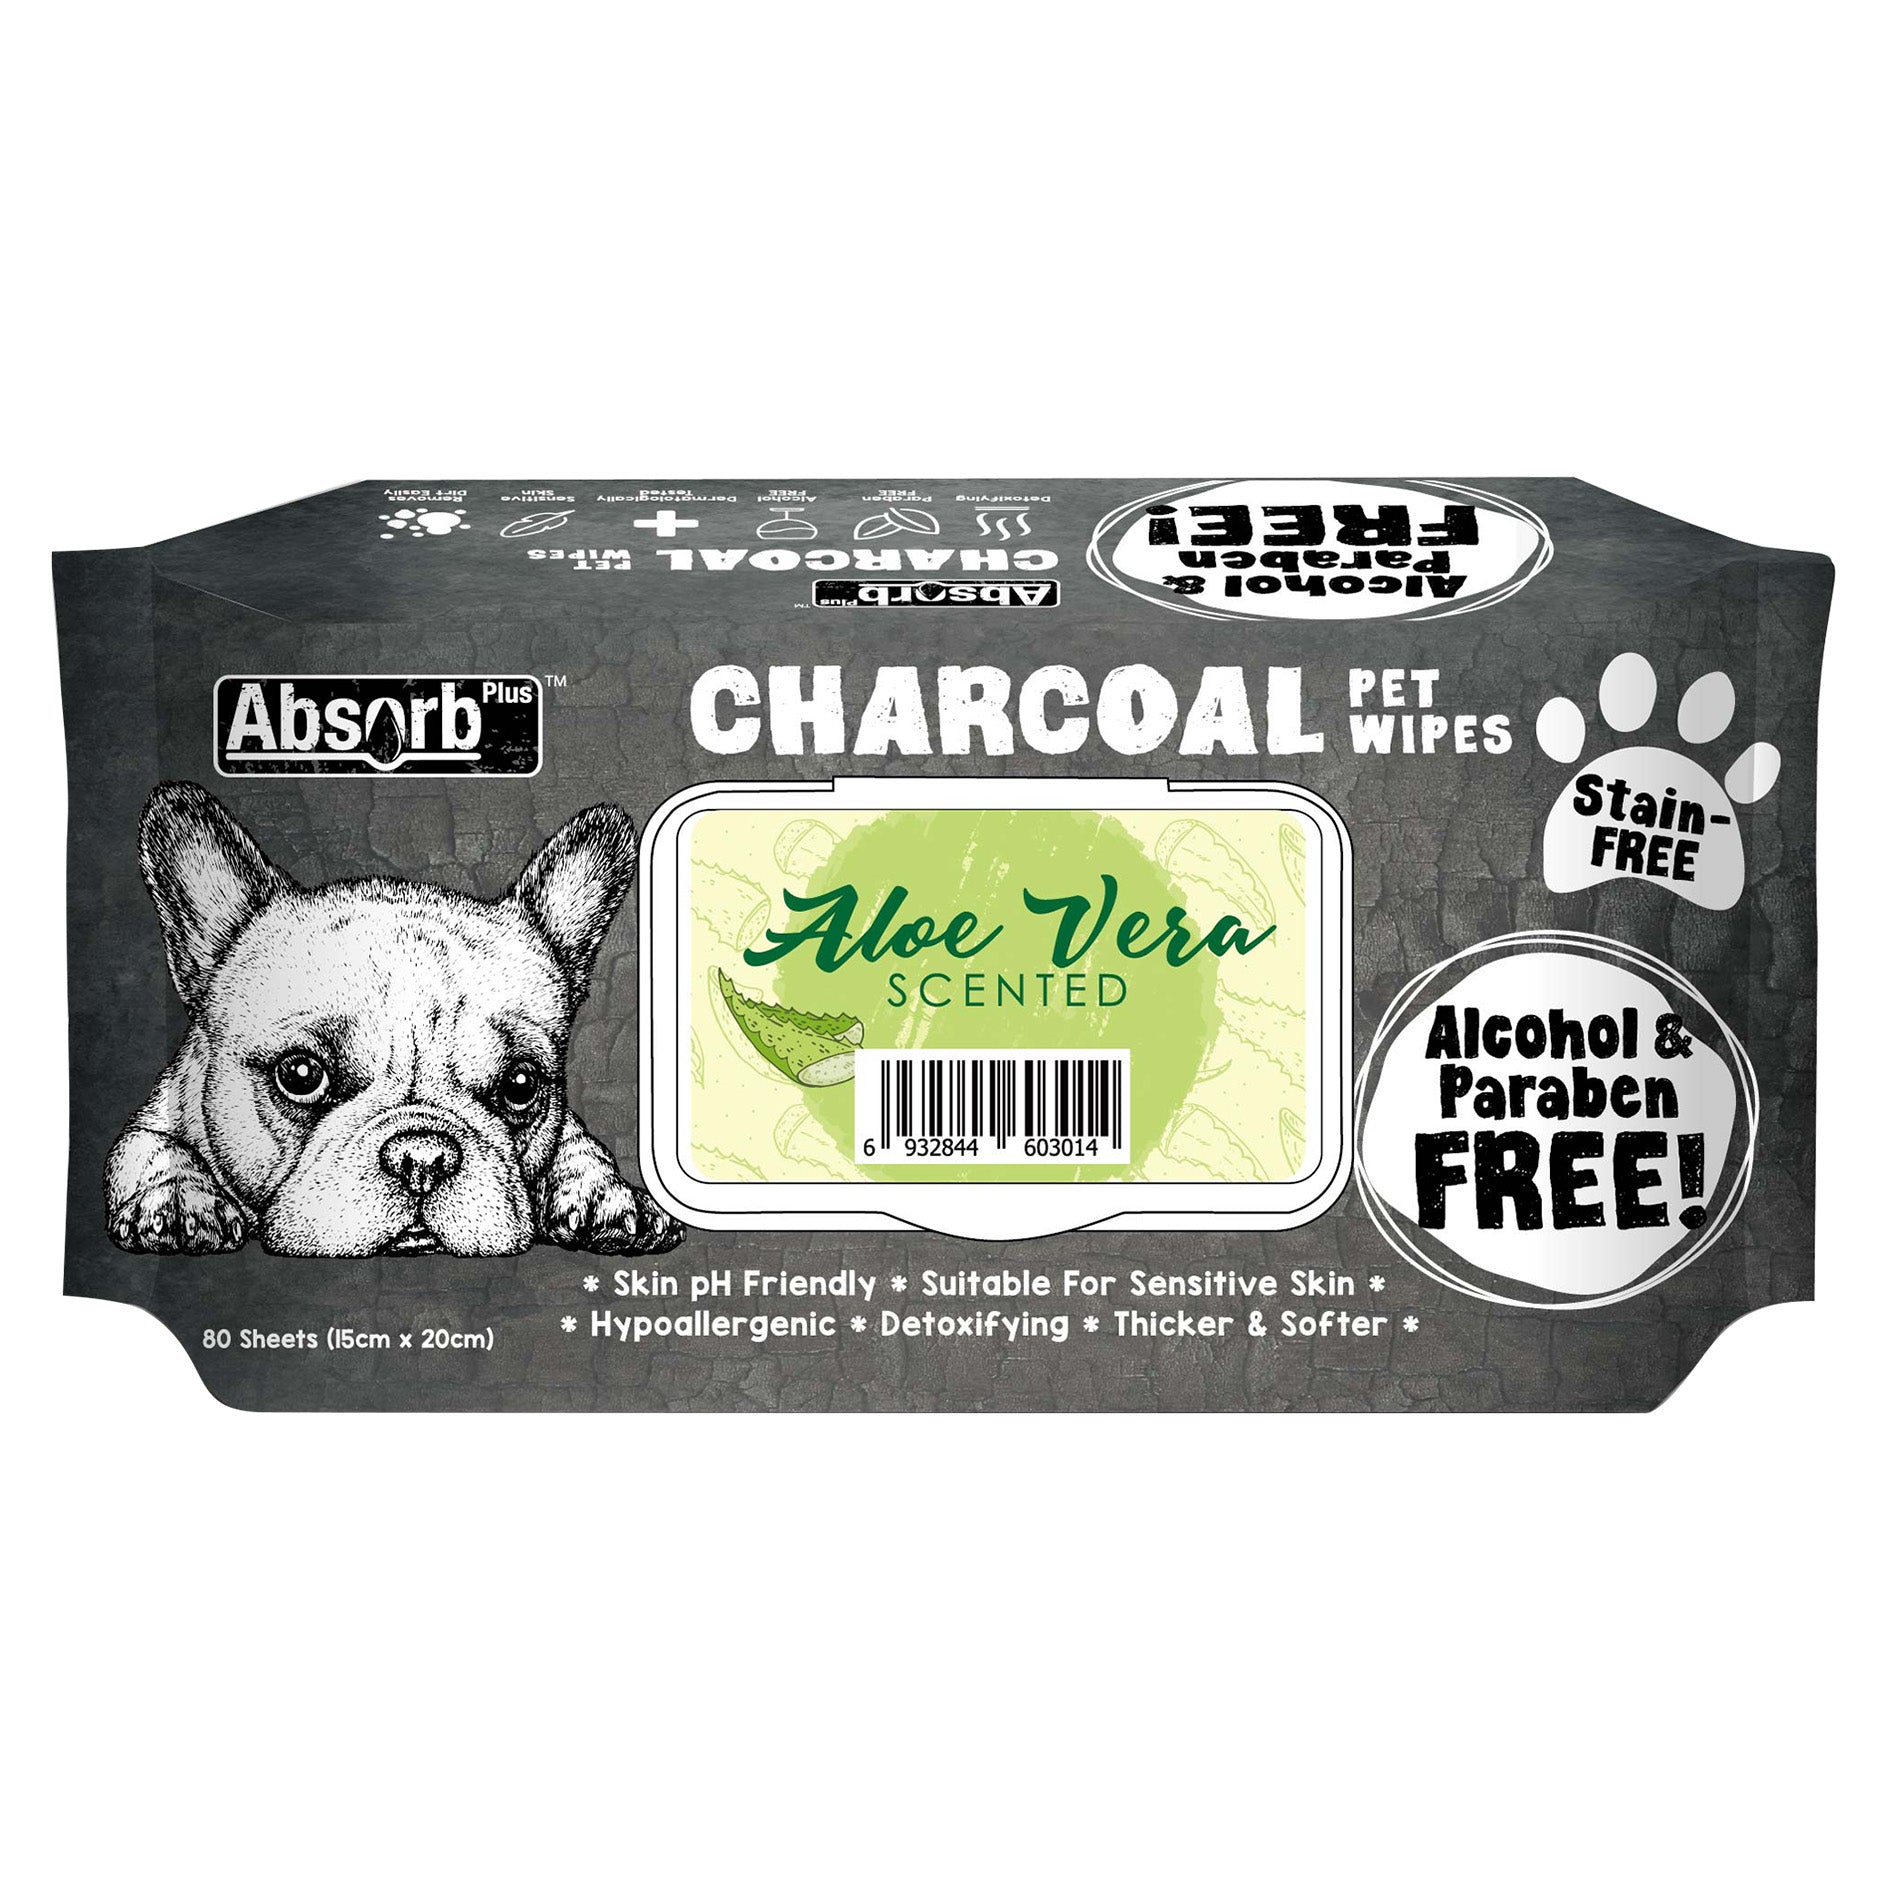 Copy of Copy of Absorb Plus Charcoal Wet Wipes - Aloe Vera (6968592990369)